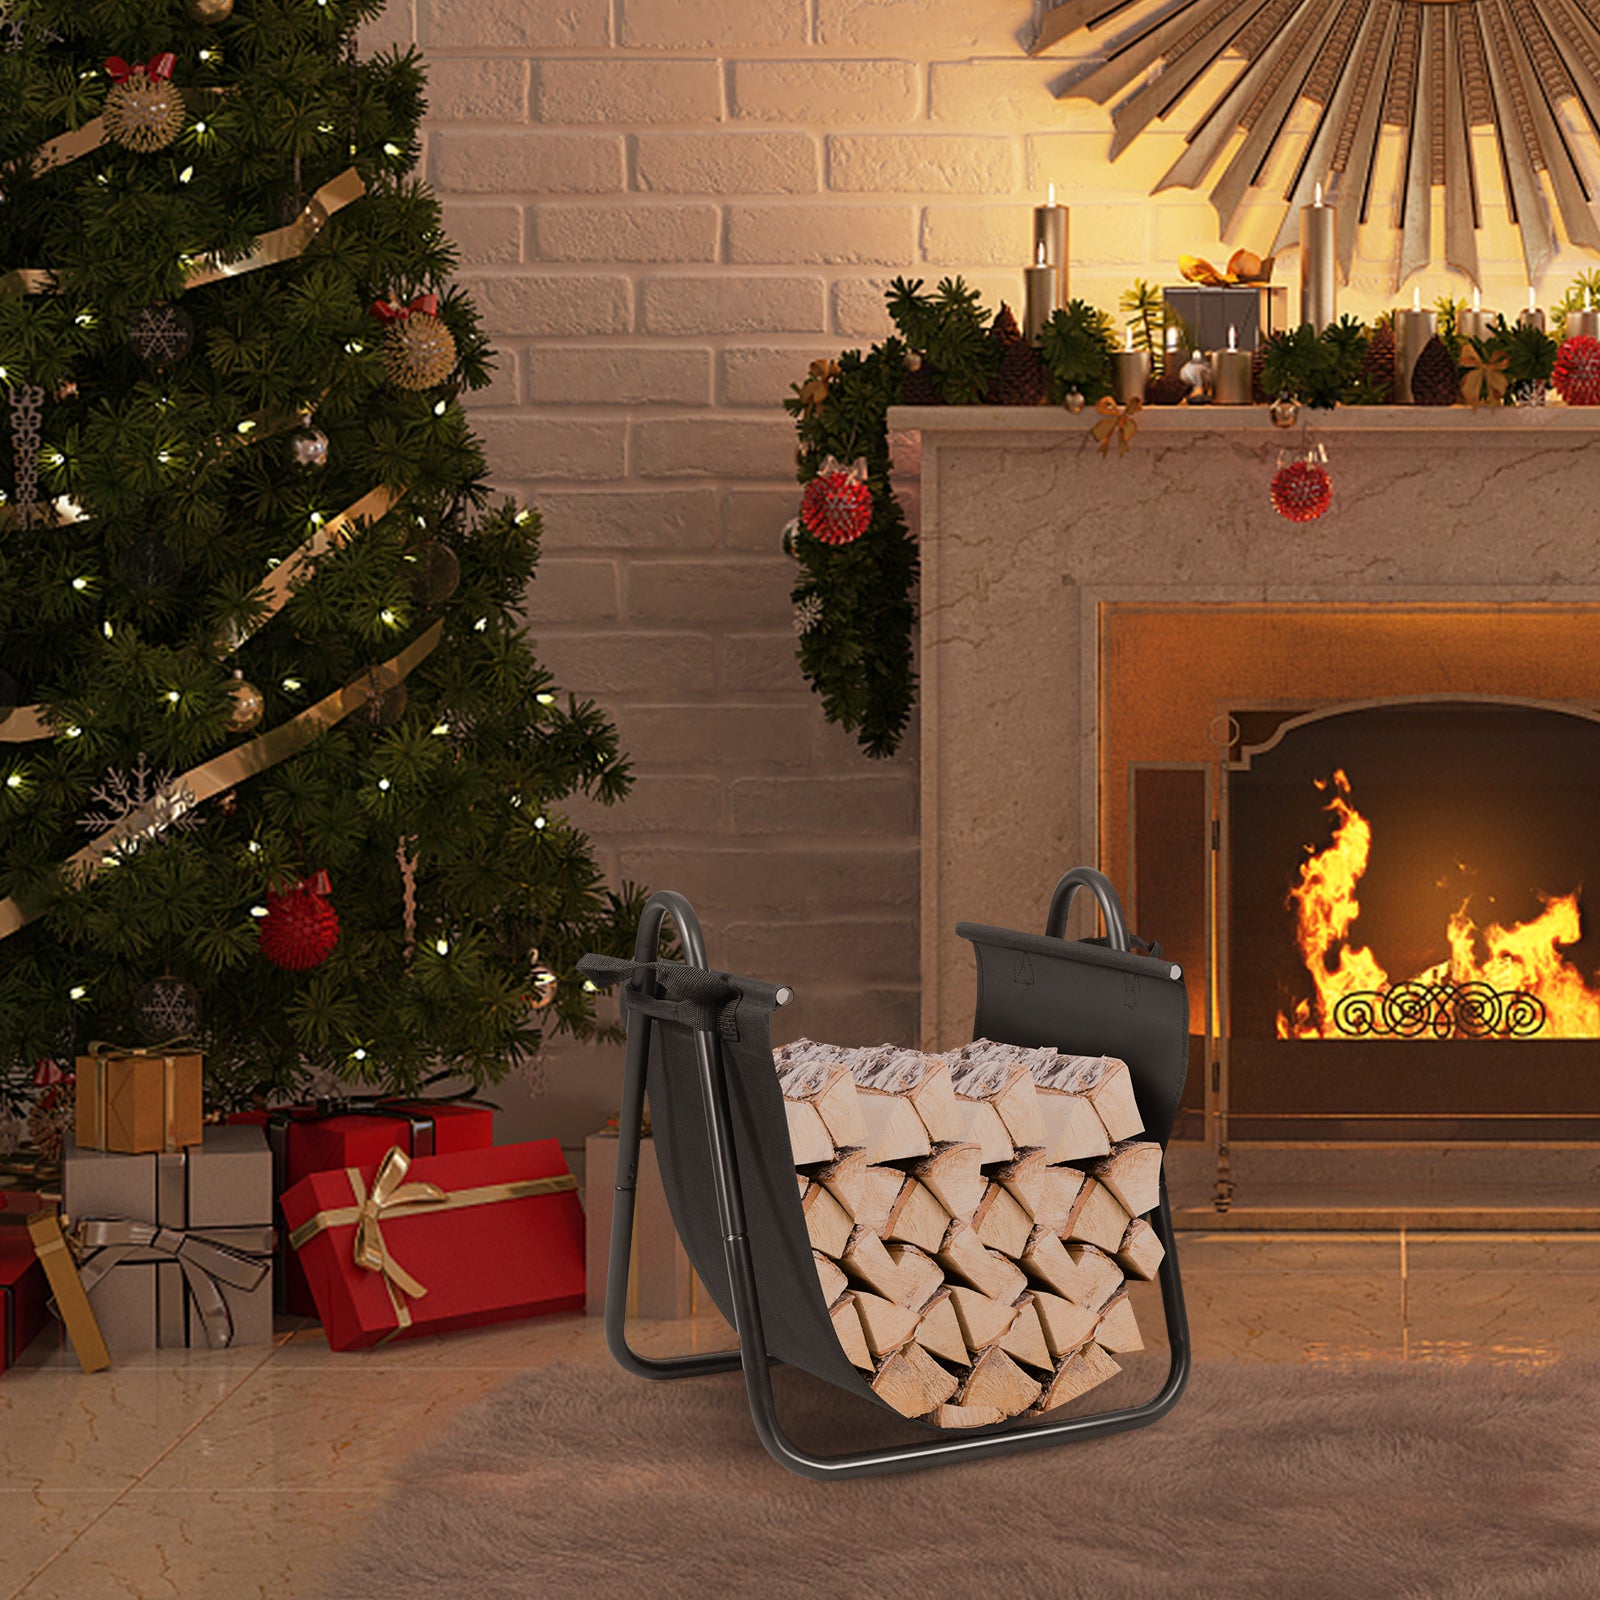 46 x 43 x 52cm Fireplace Log Holder with Canvas Tote Carrier